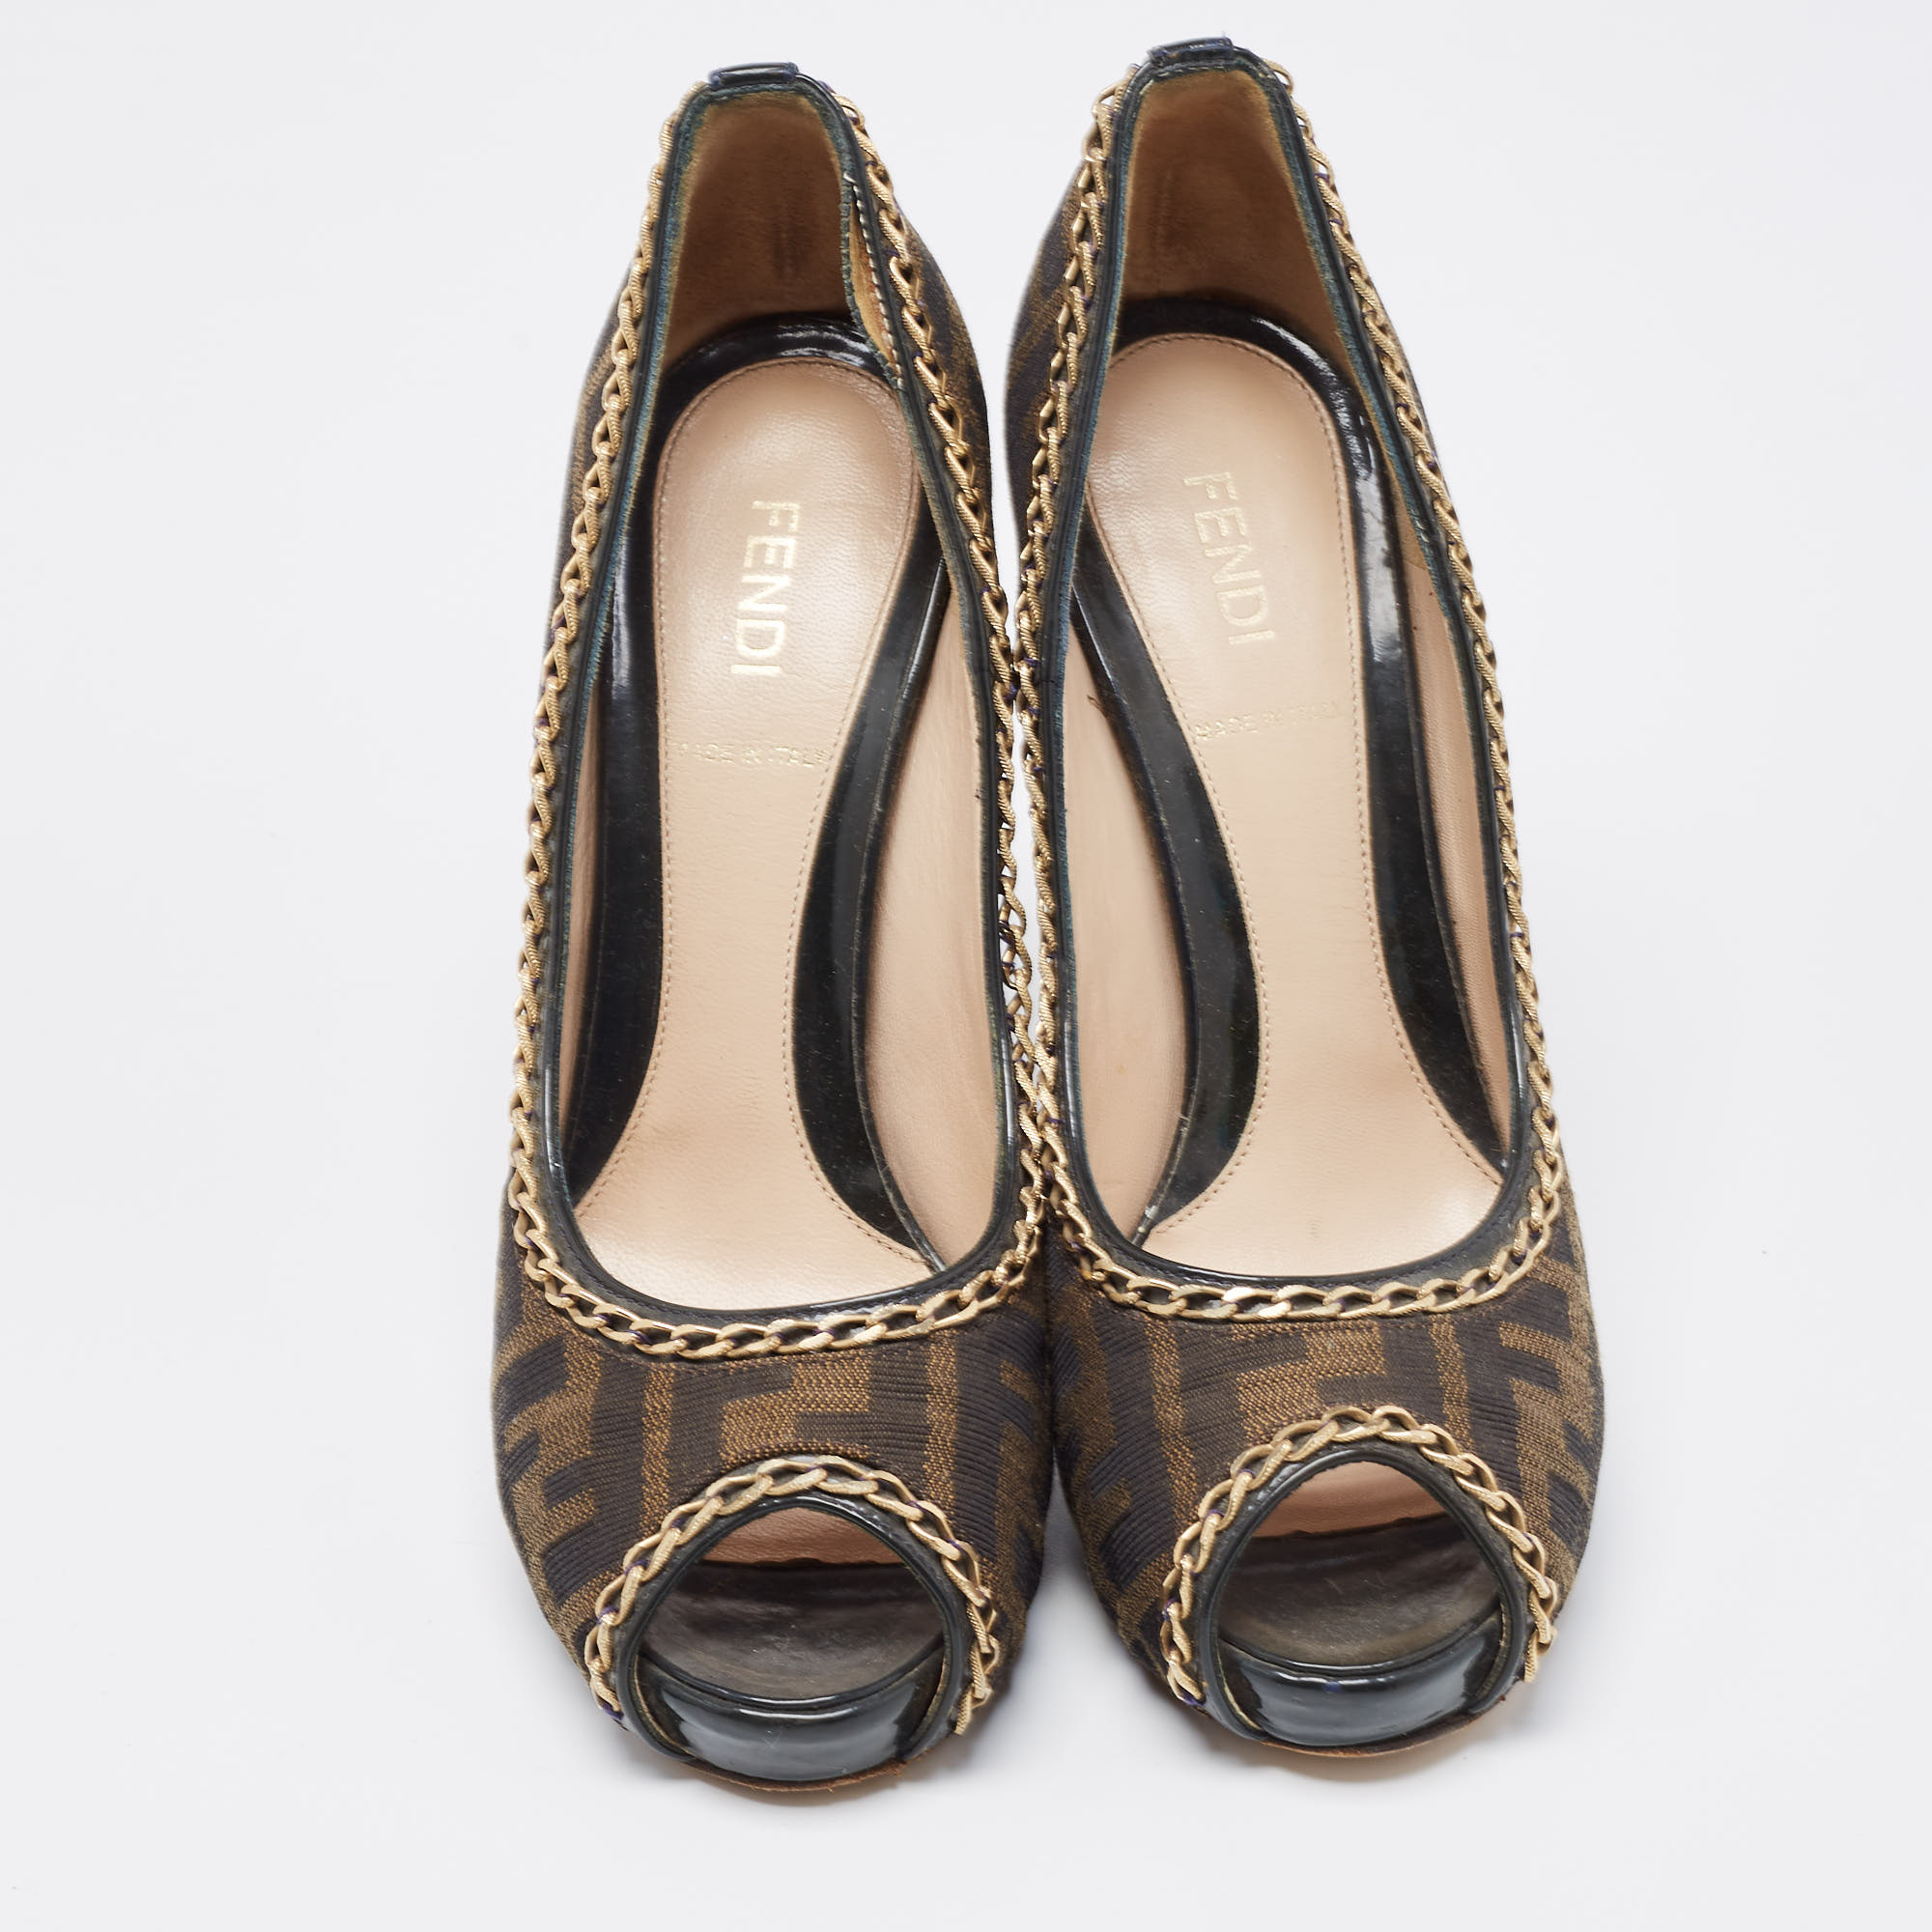 Fendi Brown Zucca Canvas Chain Embellished Peep Toe Pumps Size 37